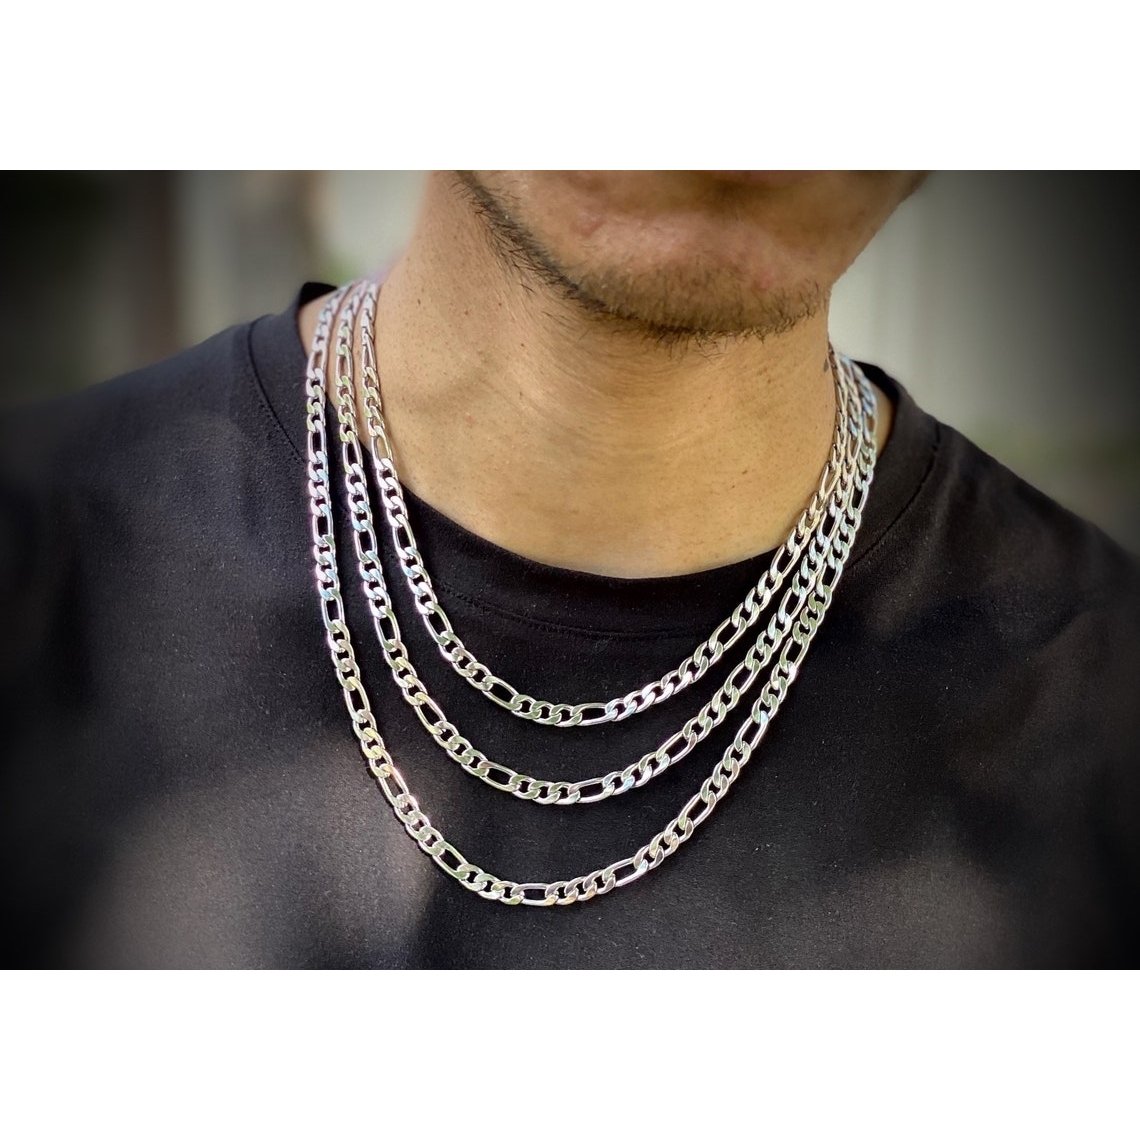 4mm Figaro Chain Necklace - Stainless Steel Necklace Men - Stainless Steel Chain Necklace - Mens Necklace Stainless Steel - Gifts For Him -